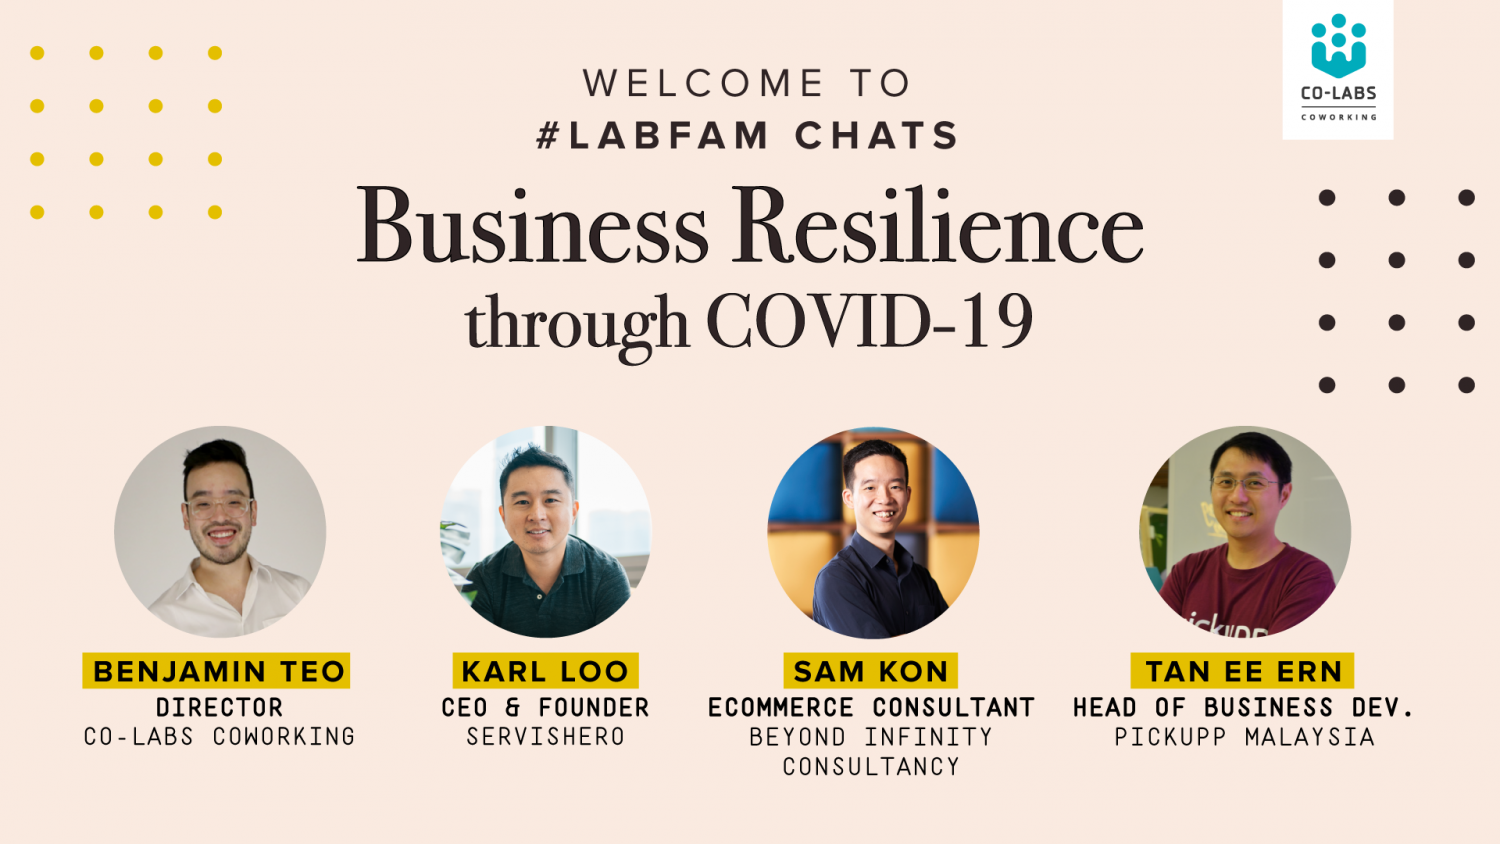 #LabFam ChatsL Business Resilience through COVID-19 Poster